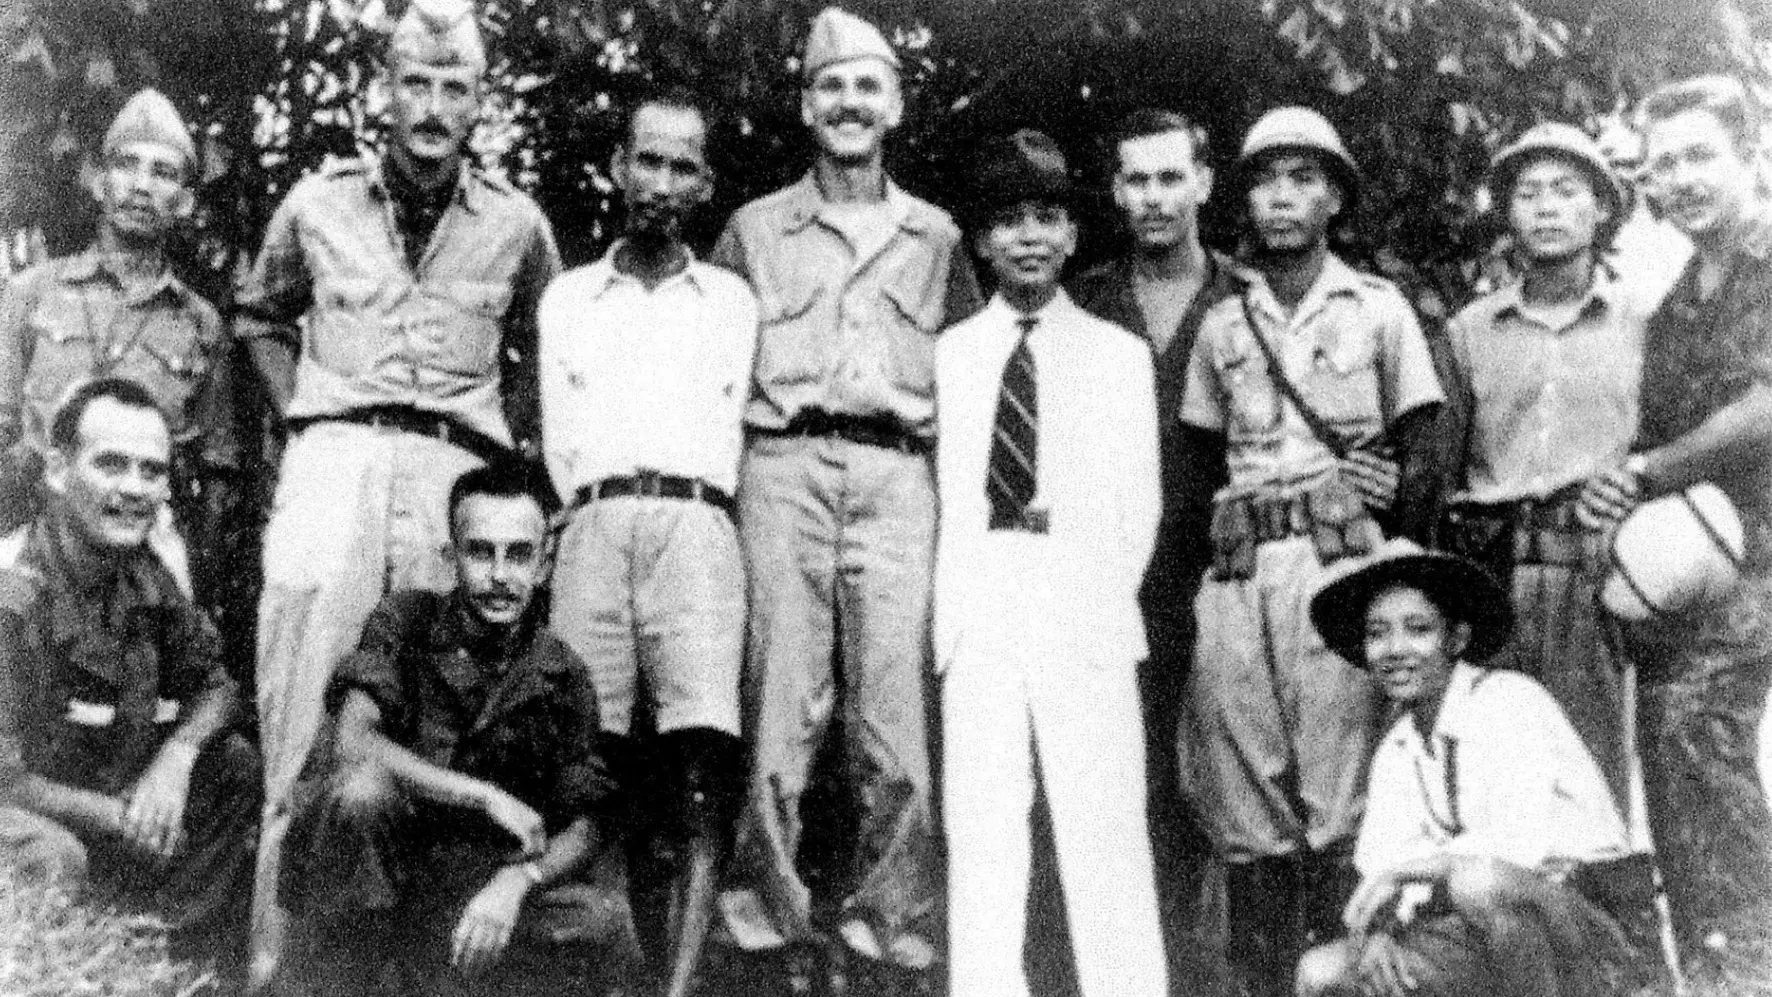 American OSS officers stand side-by-side with Ho Chi Minh and Viet Minh resistance forces.